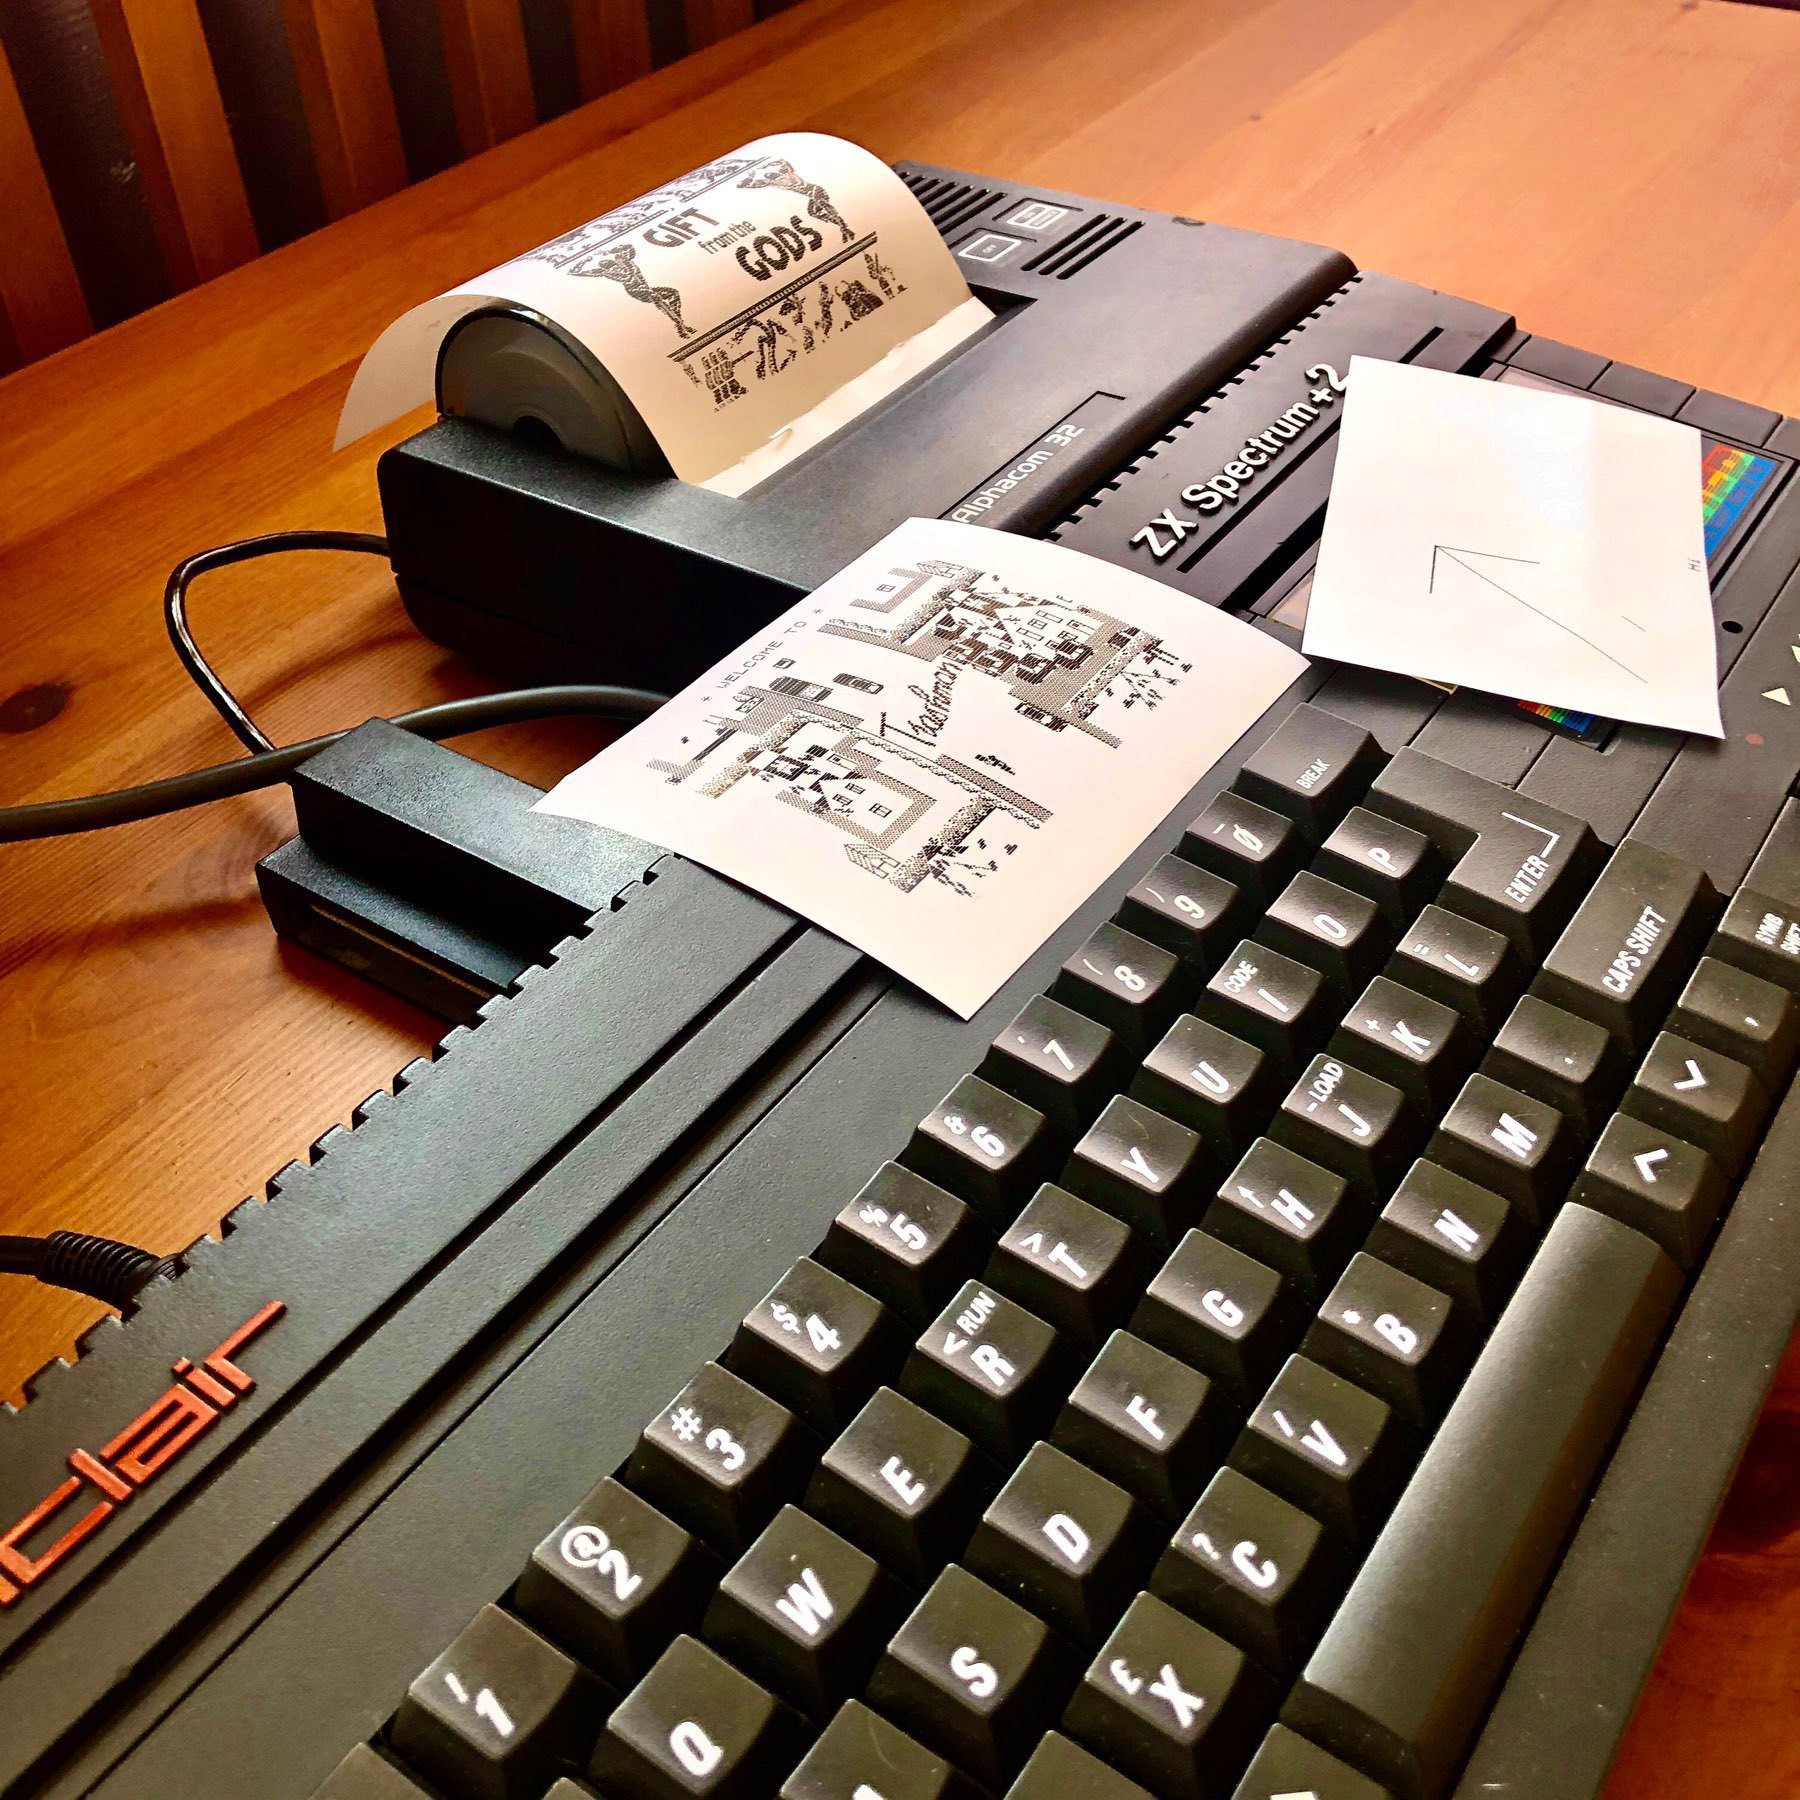 ZX Spectrum and printer, with various print-outs